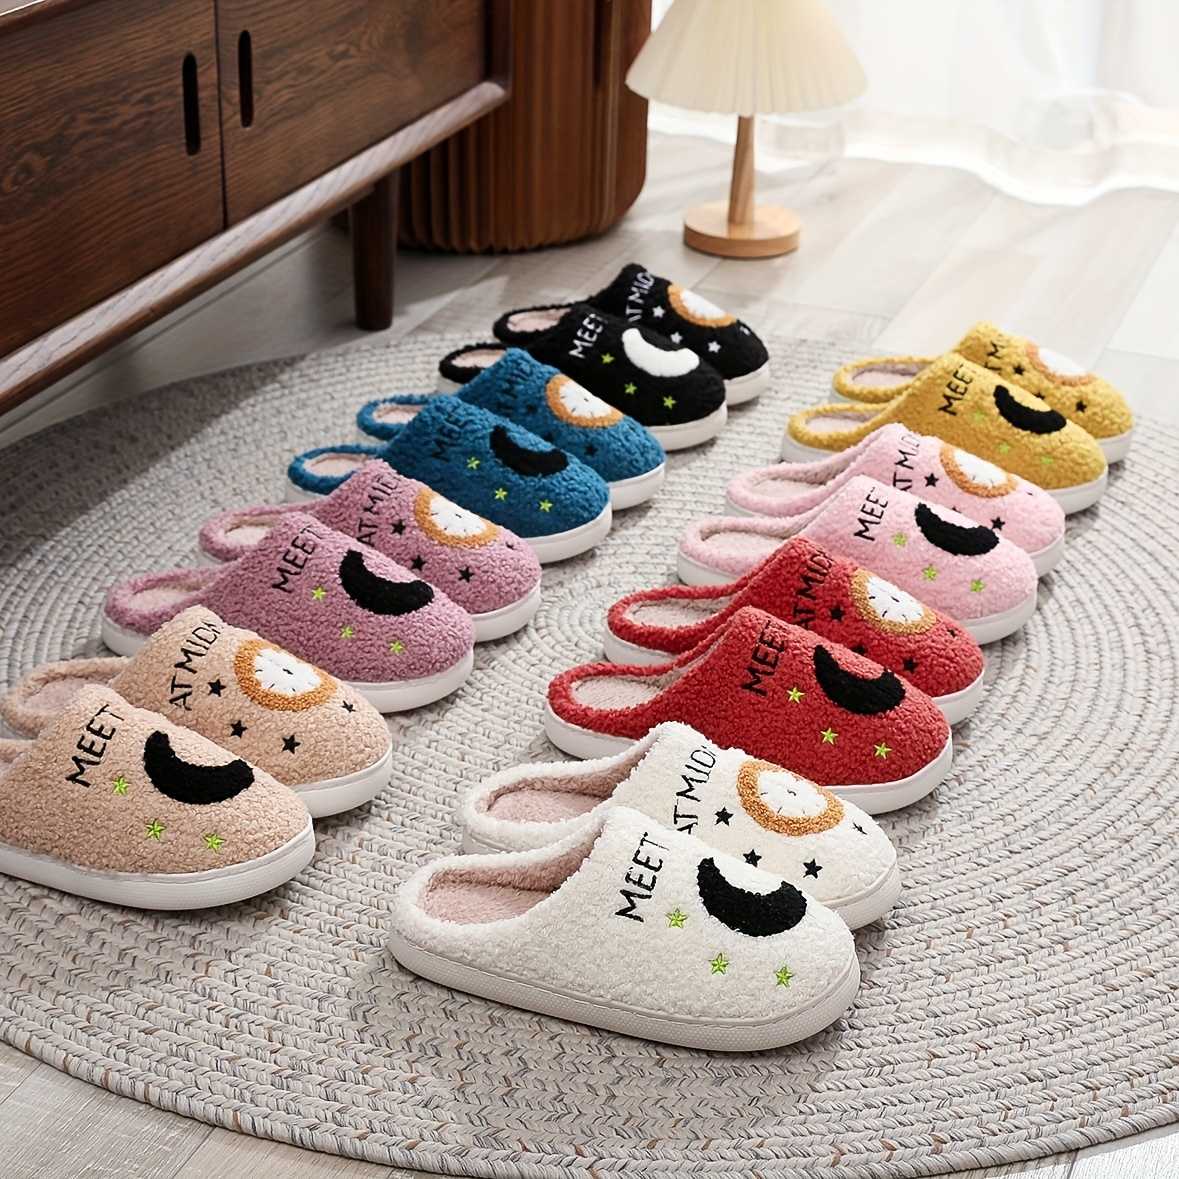 

Women's Home Plush Slippers, Meet Me At Midnight Warm Fuzzy Shoes, Indoor Bedroom Slippers